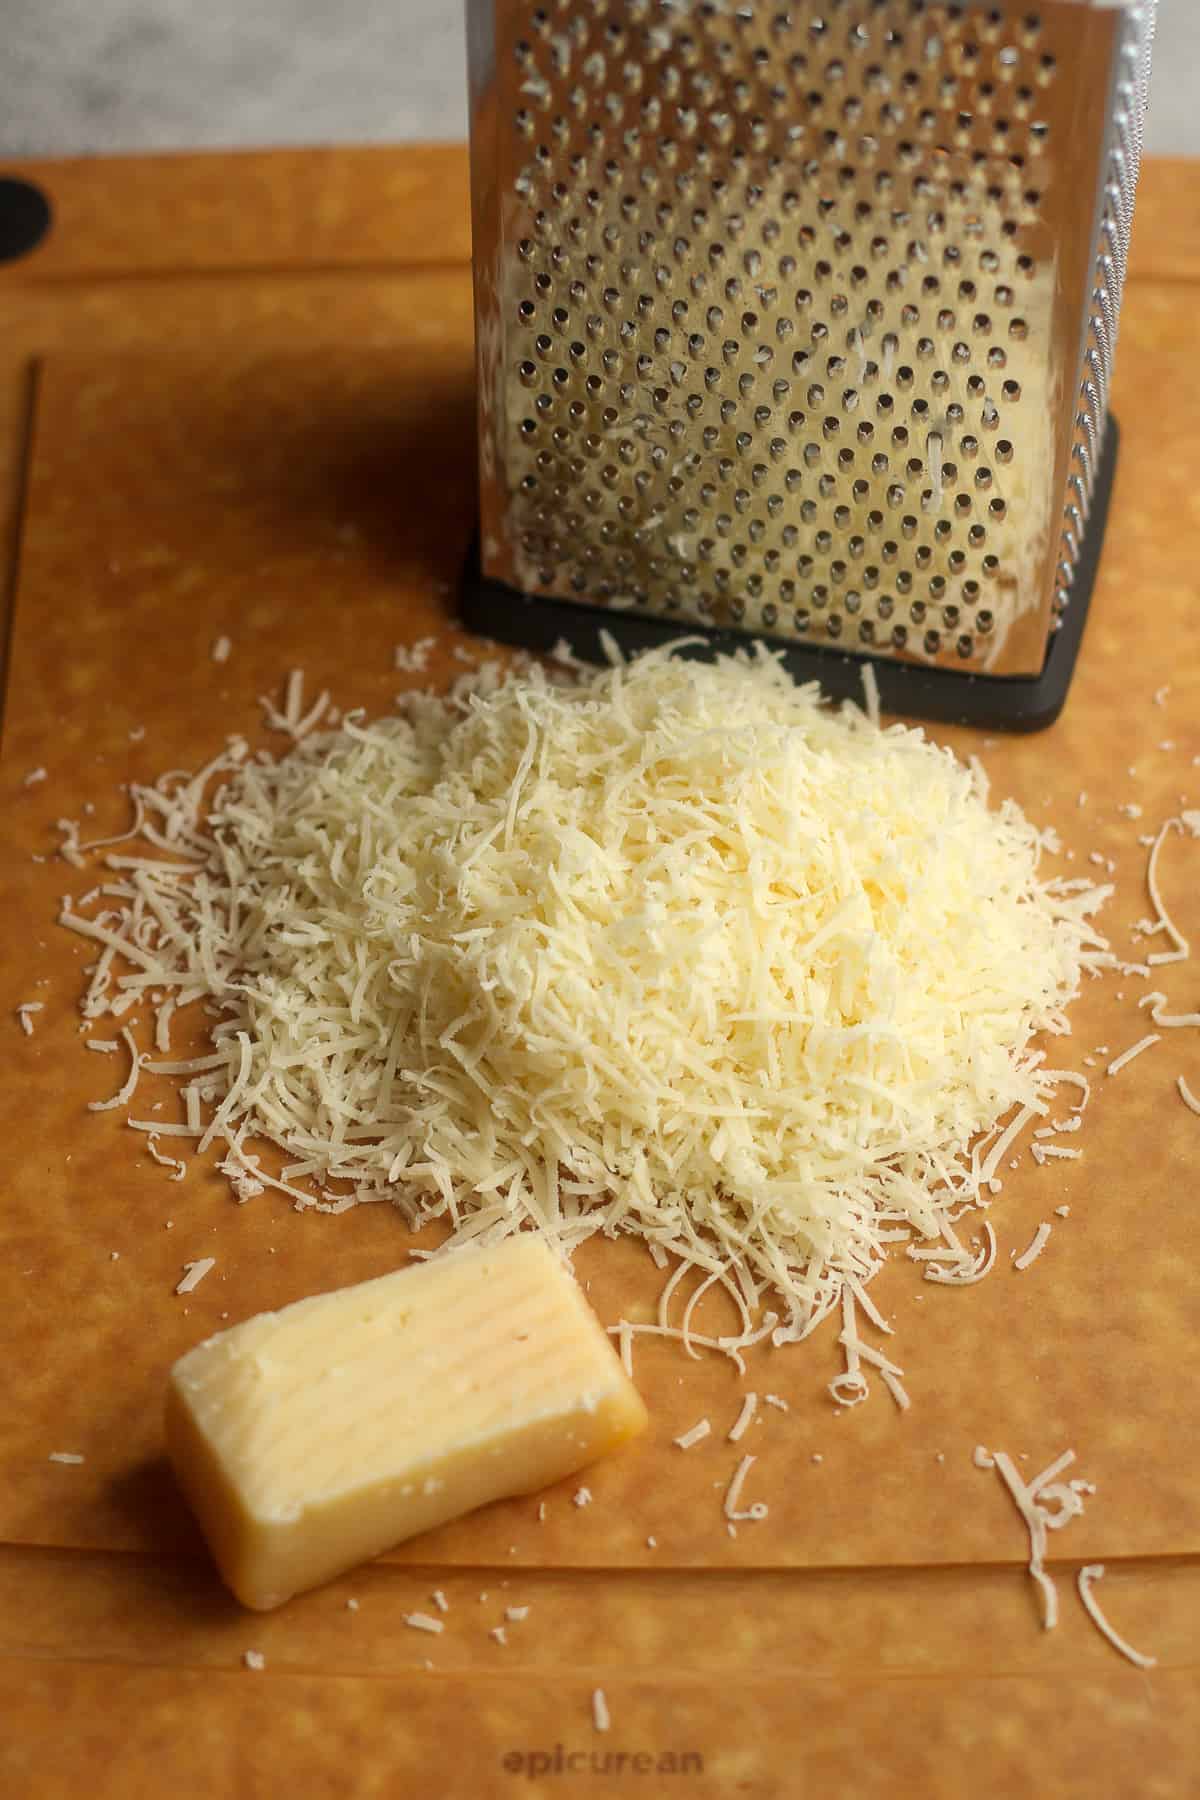 A board with a box cutter and some shredded parmesan cheese.